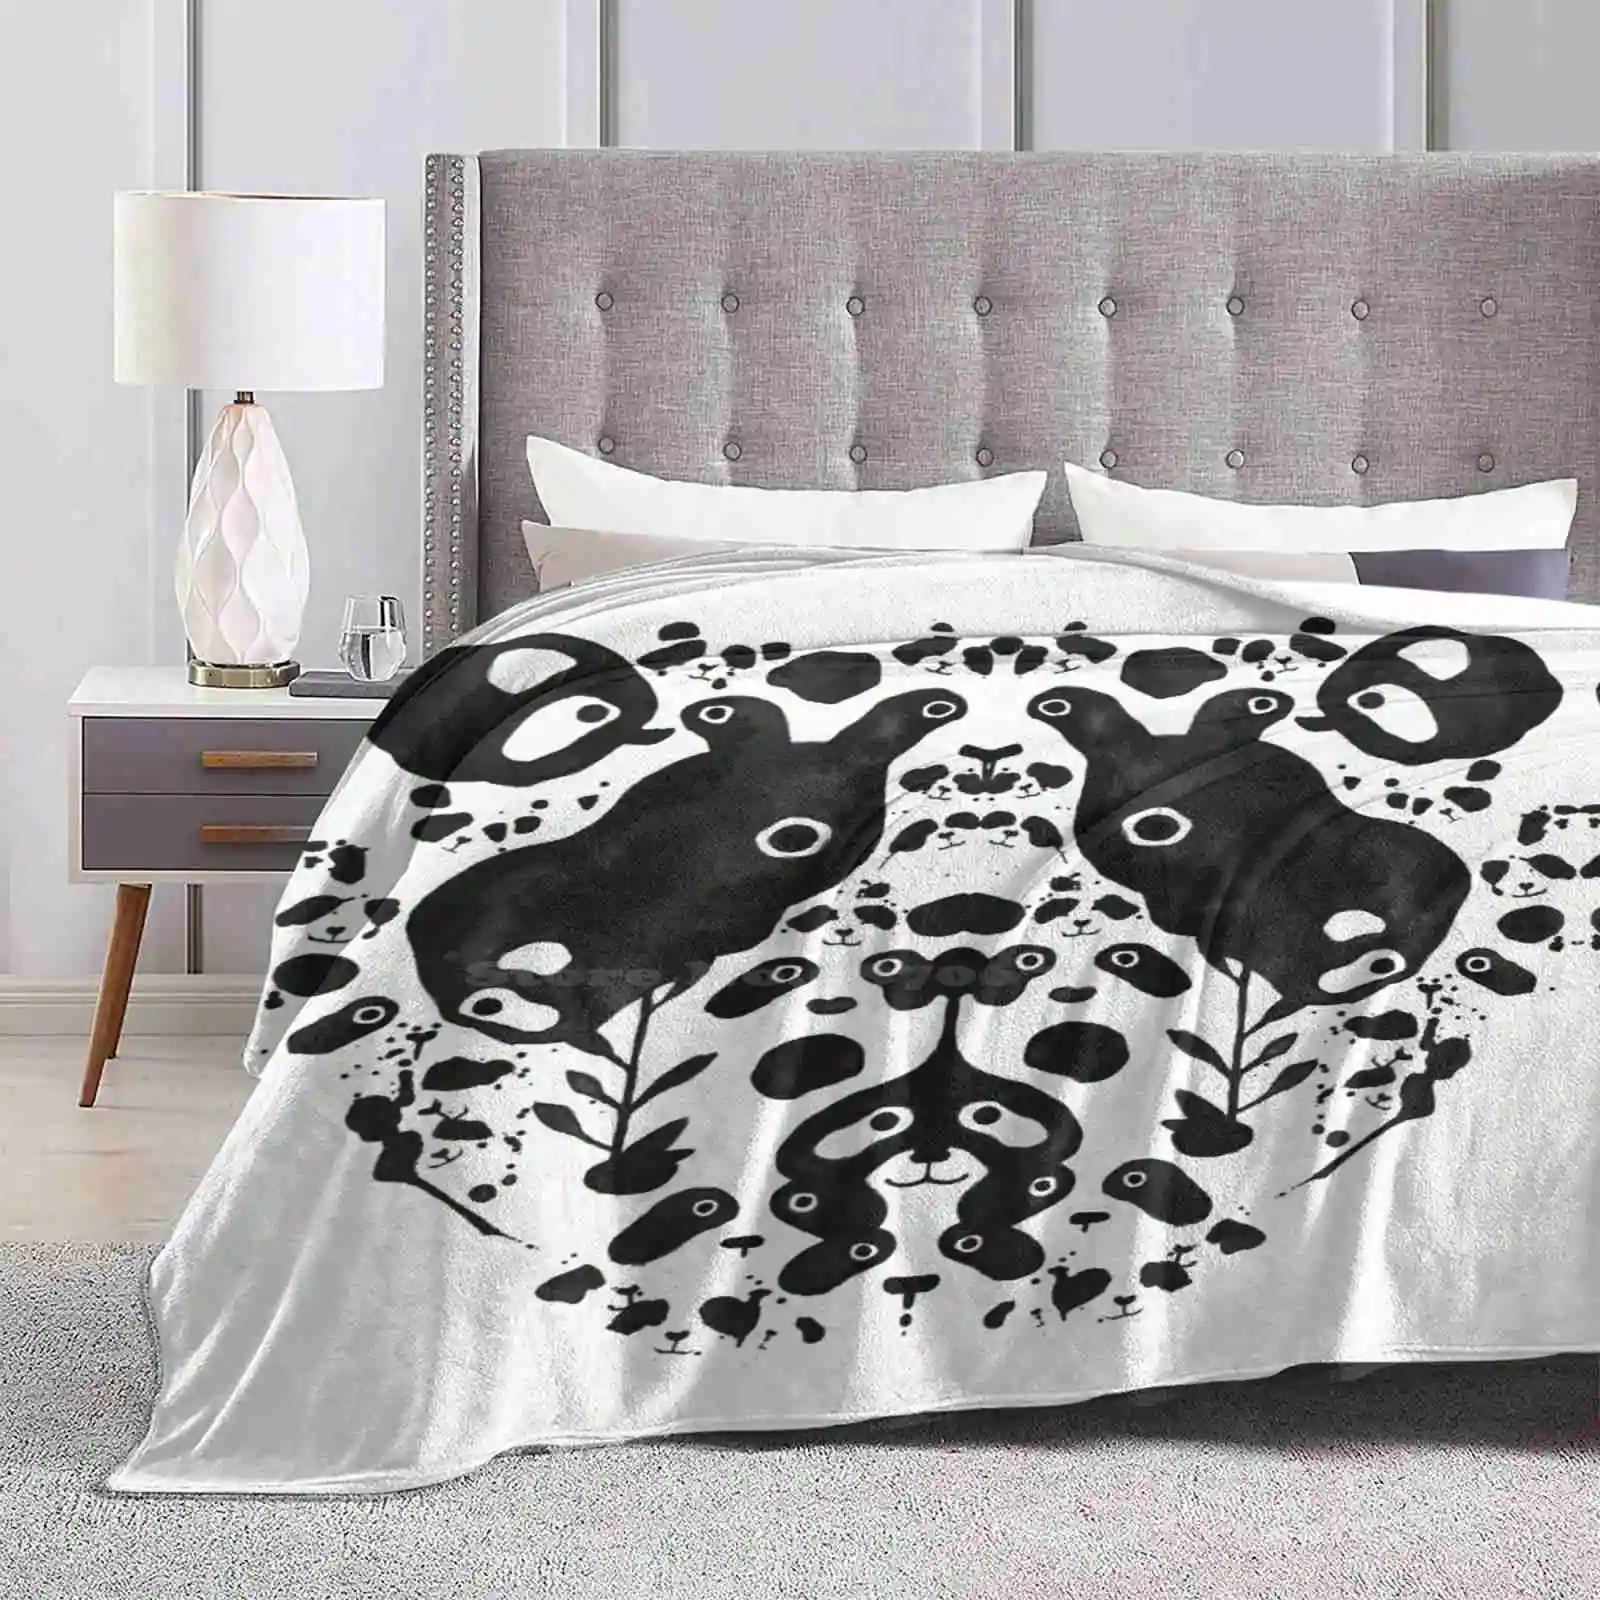 

Bamboo Forest New Selling Custom Print Flannel Soft Blanket Panda Bamboo Forest Animals Nature Funny Psicology Arty Artistic